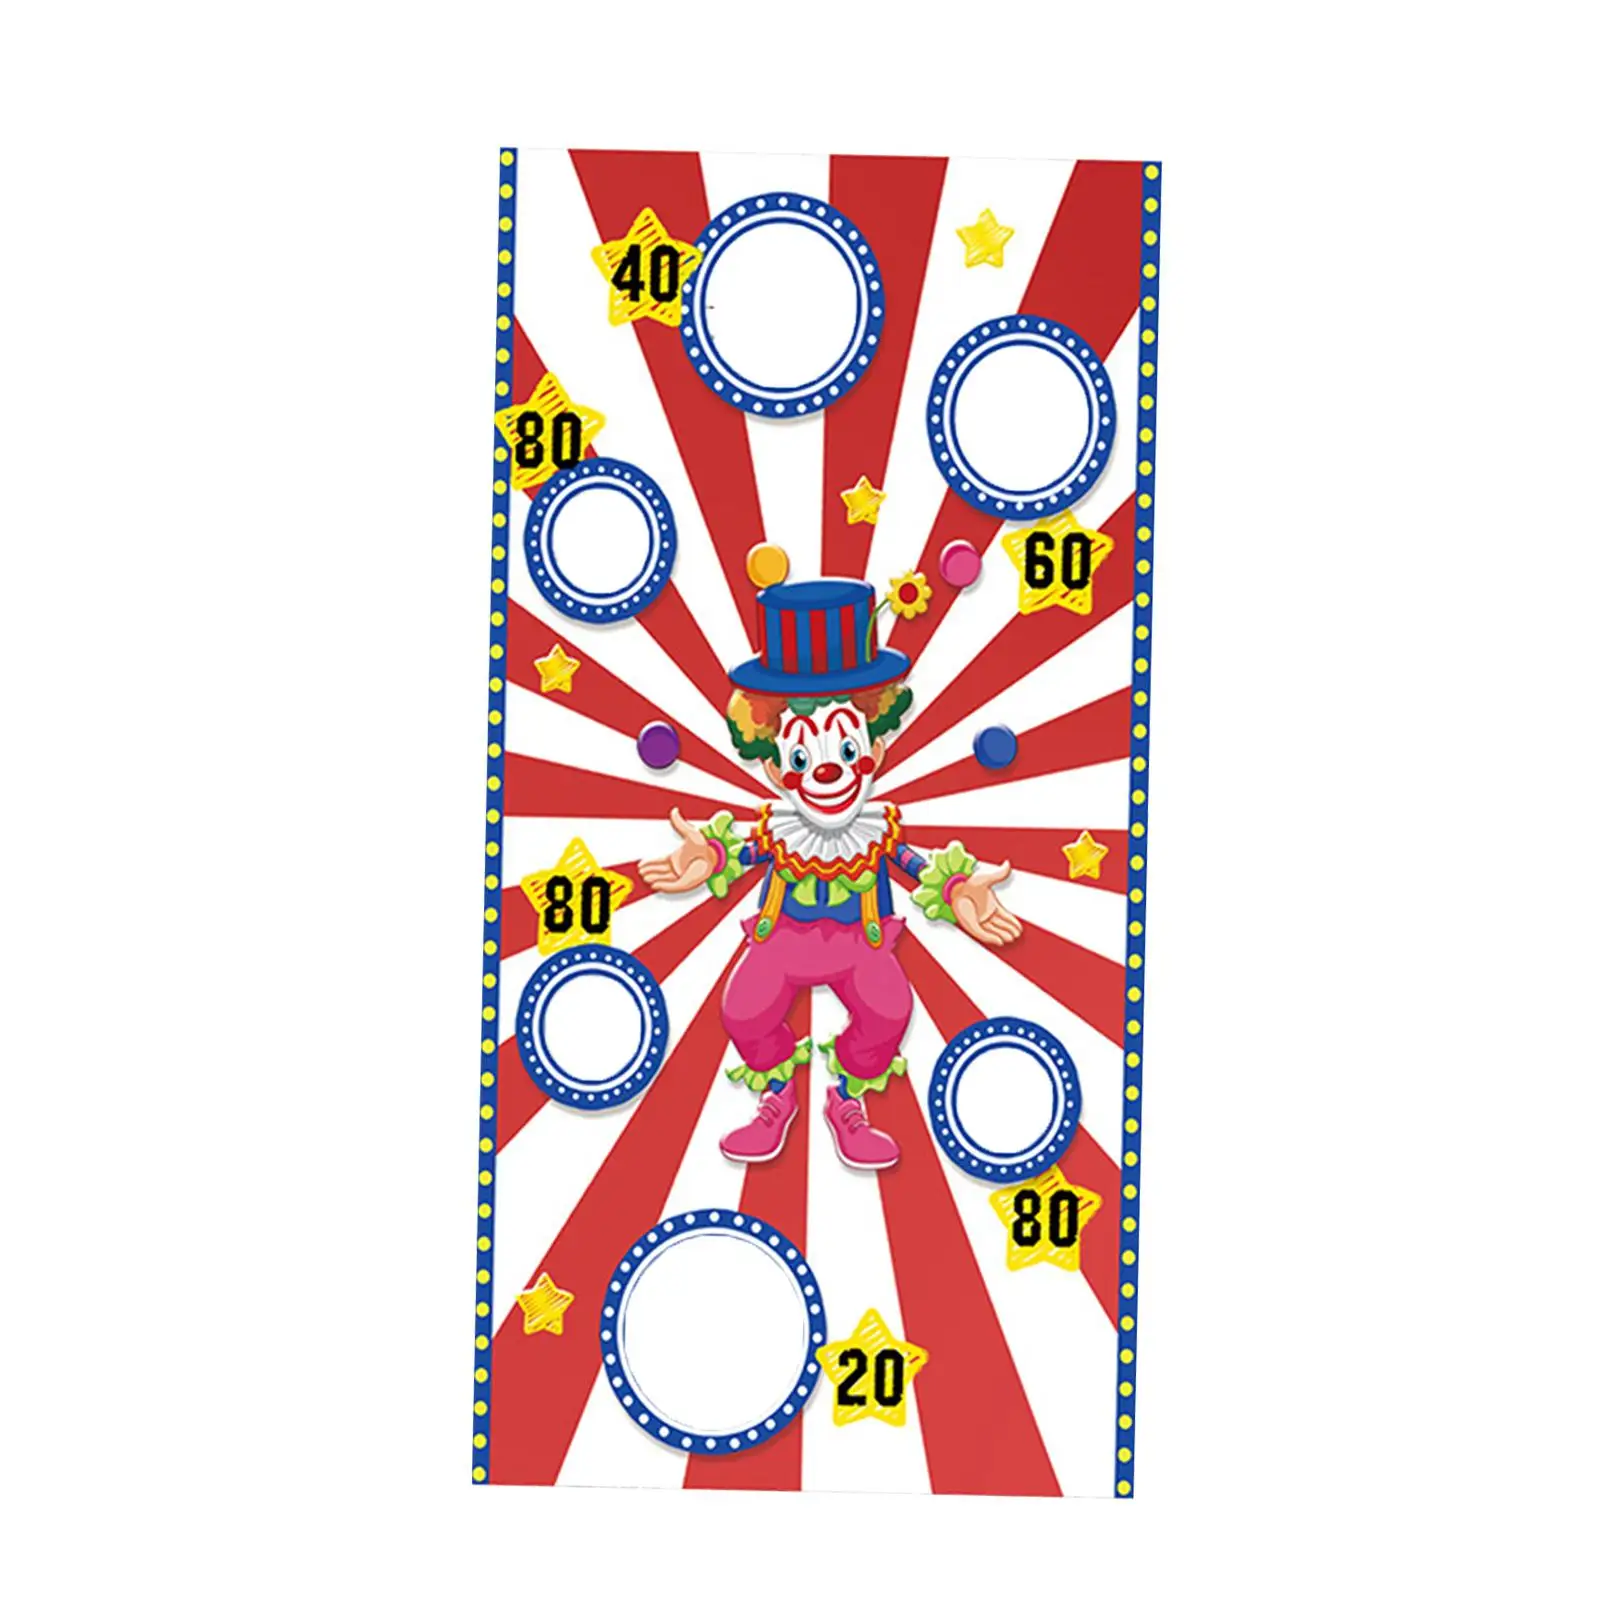 Throwing Bags Decorations Toss Game Banner for Outdoor Parent-Child